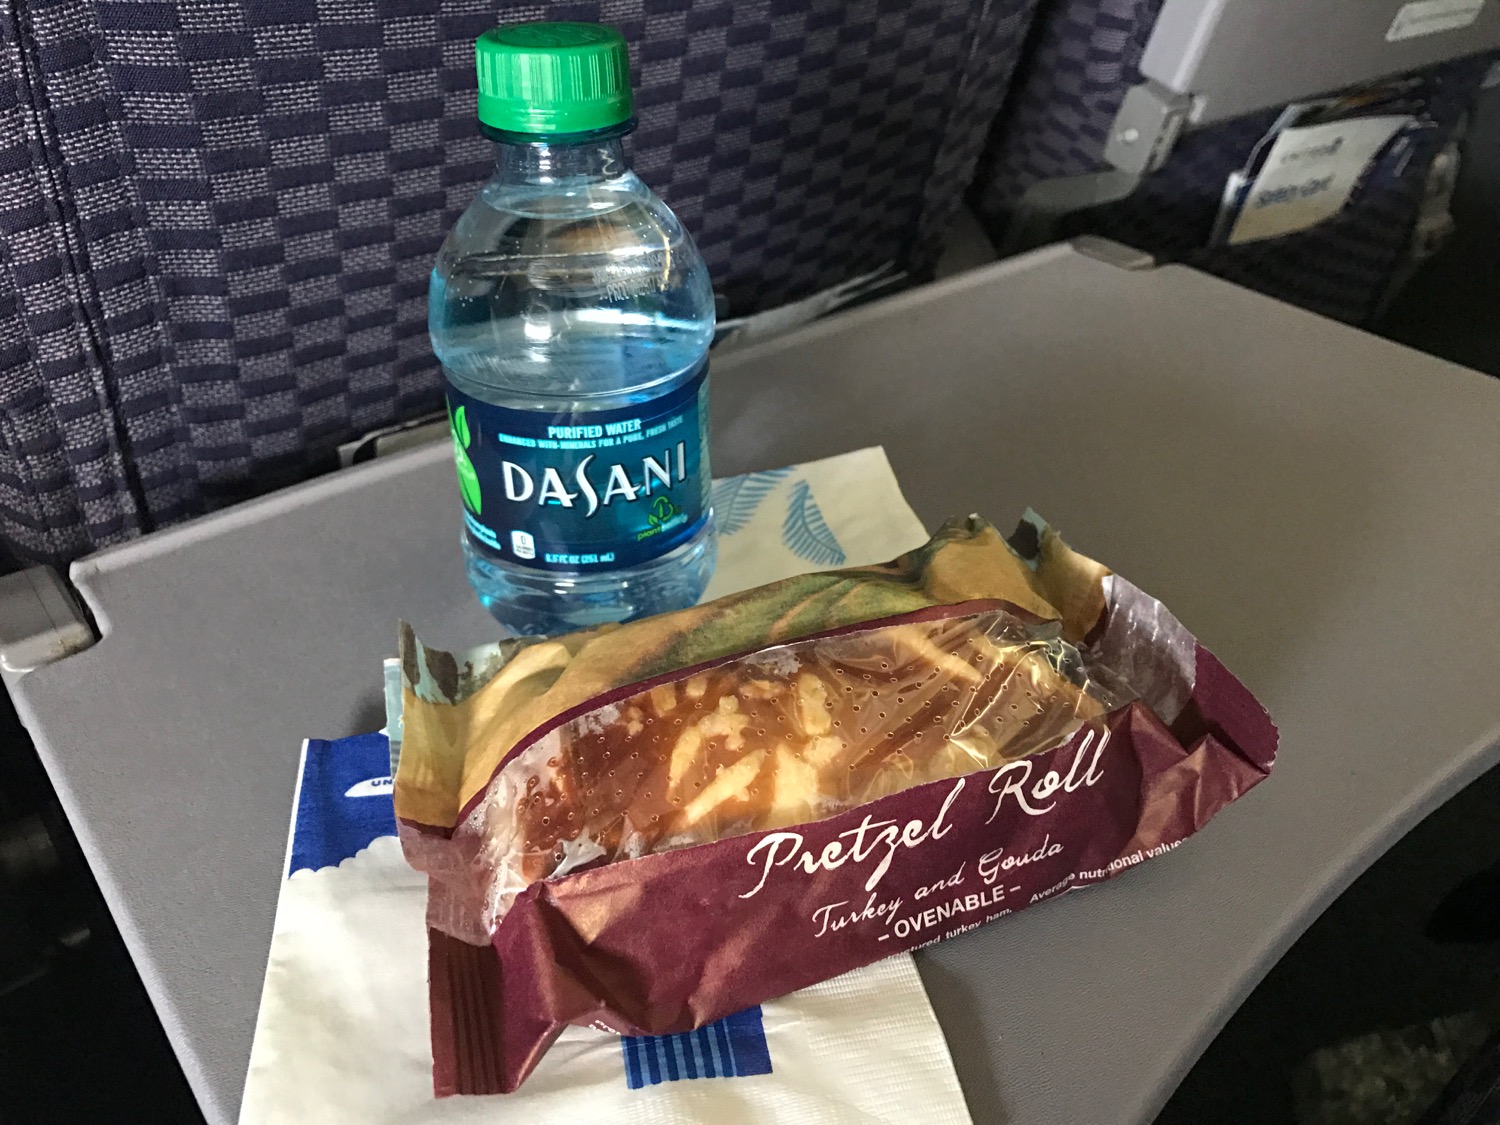 United AMS-IAH Economy Class Meal - 8